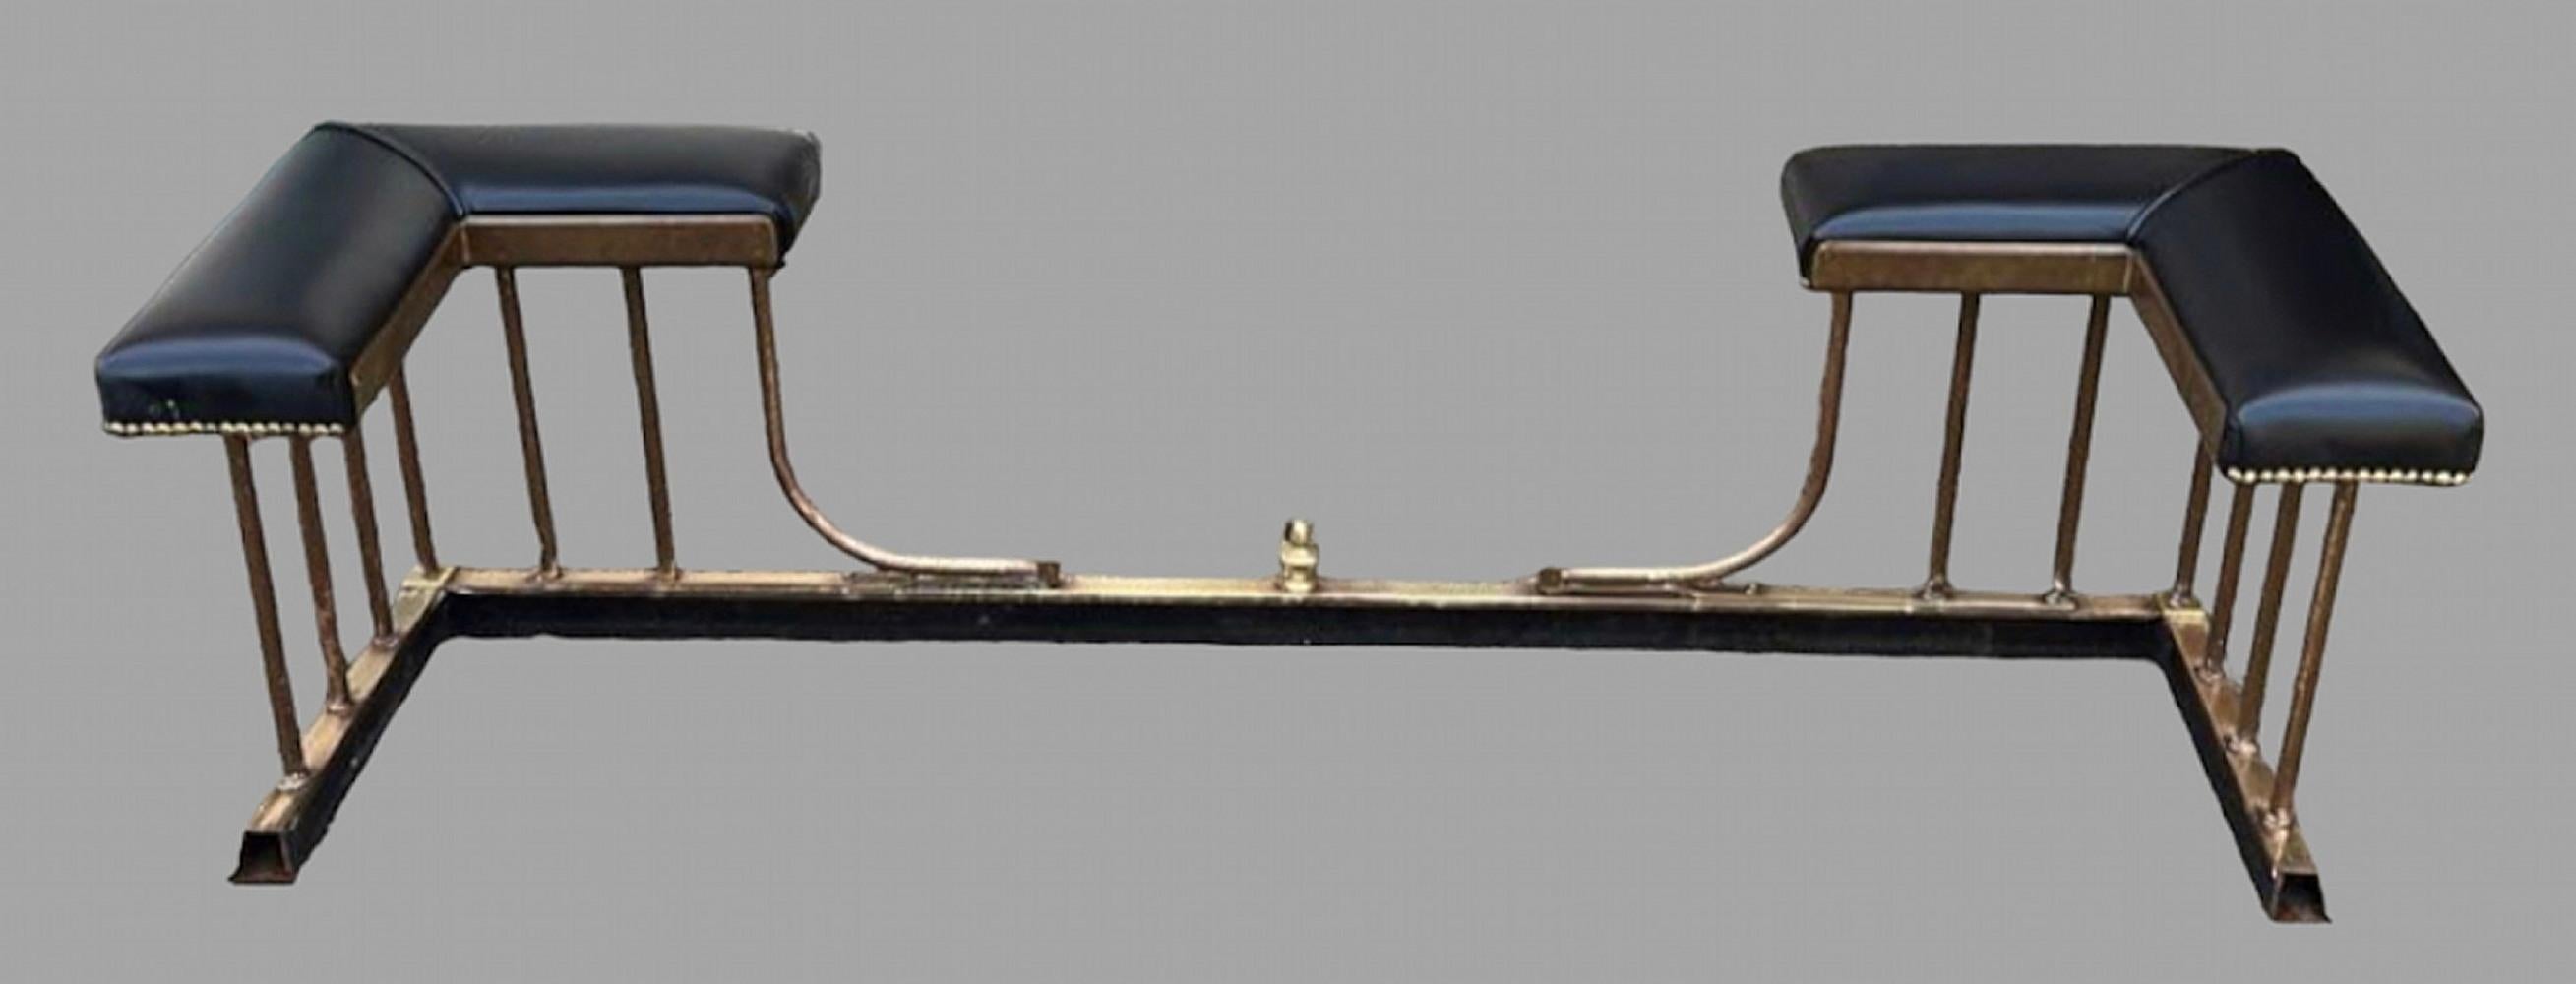 An Attractive c 1970's brass and black leather club fender. The internal measurements are Depth 36 cm and Width 148 cm with a seat width of 18 cm